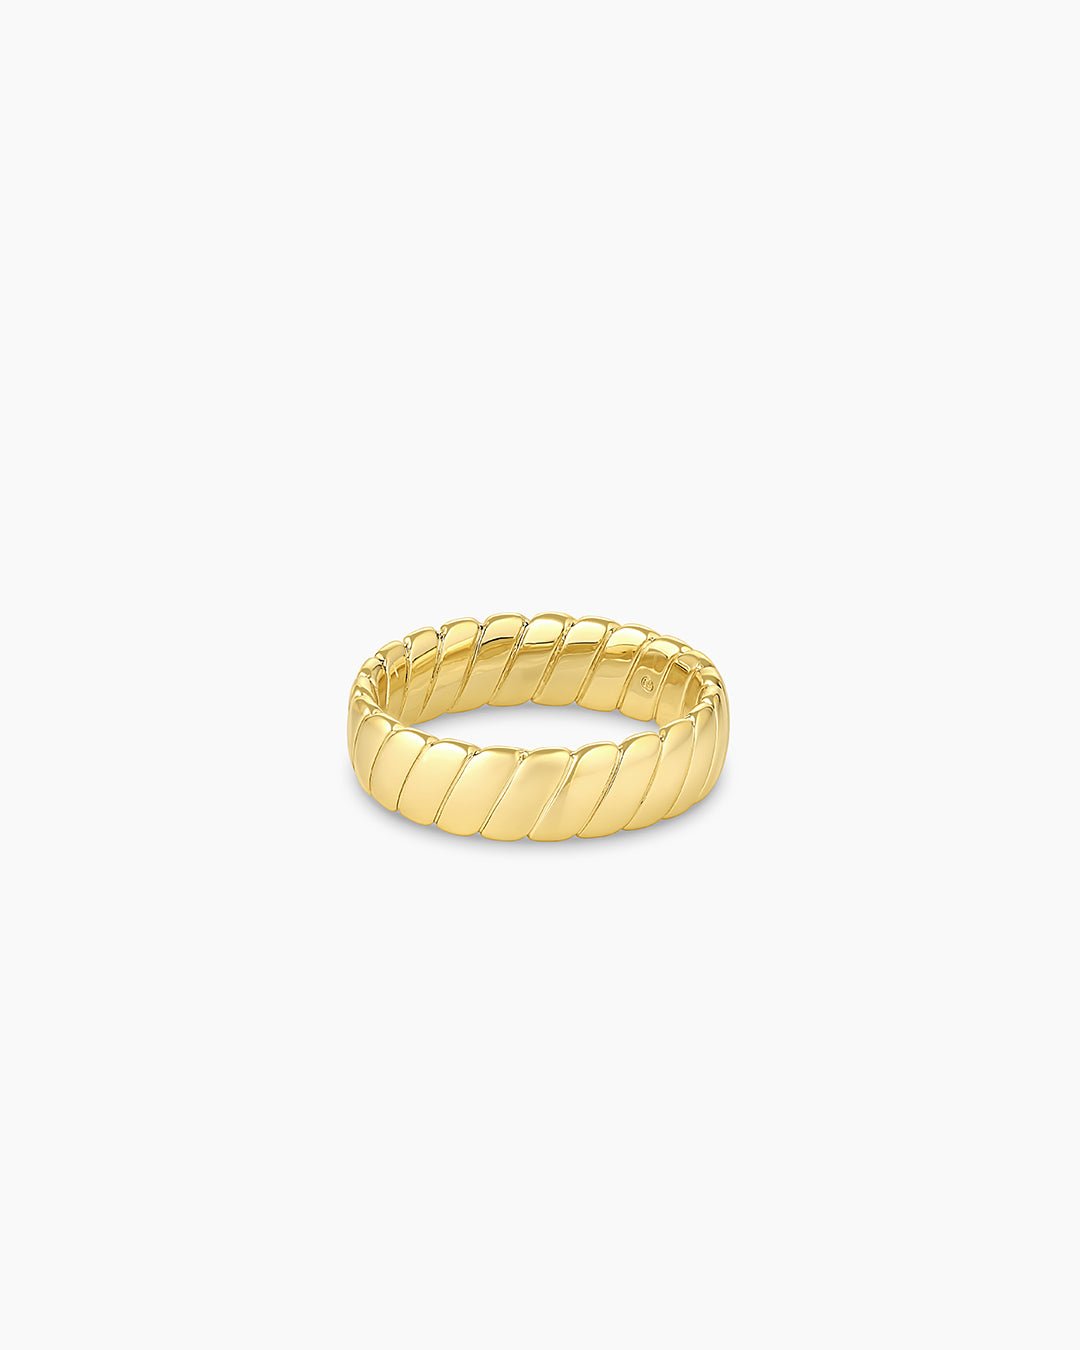 Laney RingGold Plated statement ring chunkyGold Plated ring || option::Gold Plated